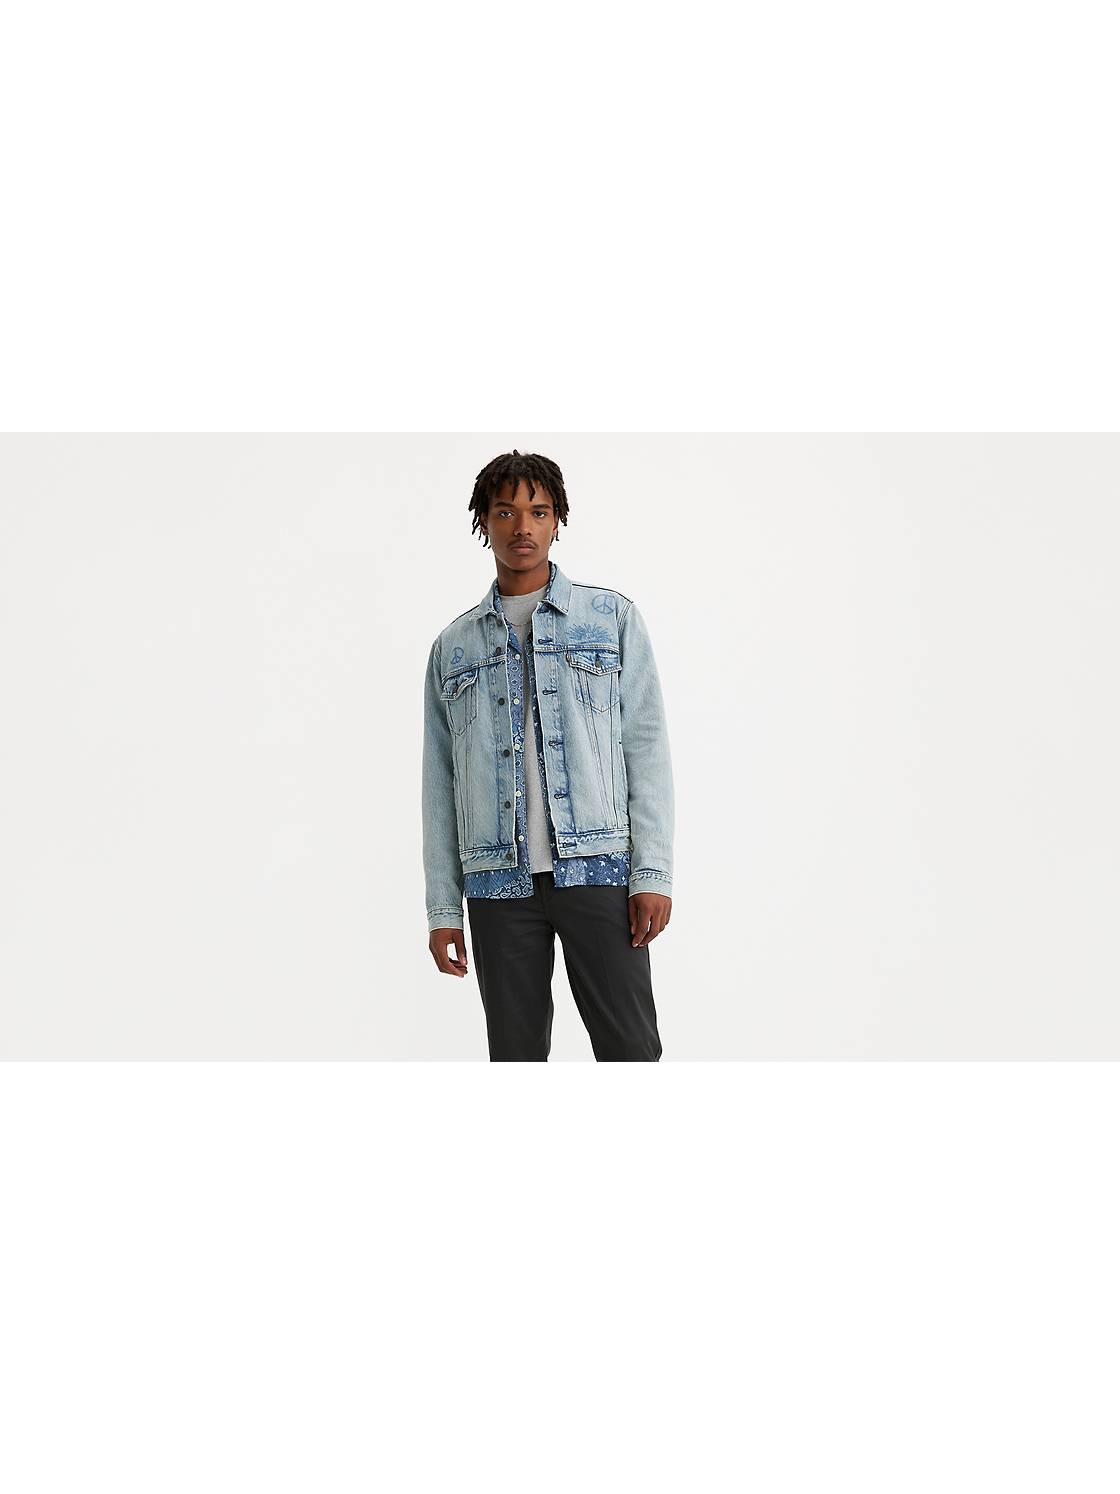 Buy SF JEANS By Pantaloons Blue Washed Denim Jacket - Jackets for Men  1630089